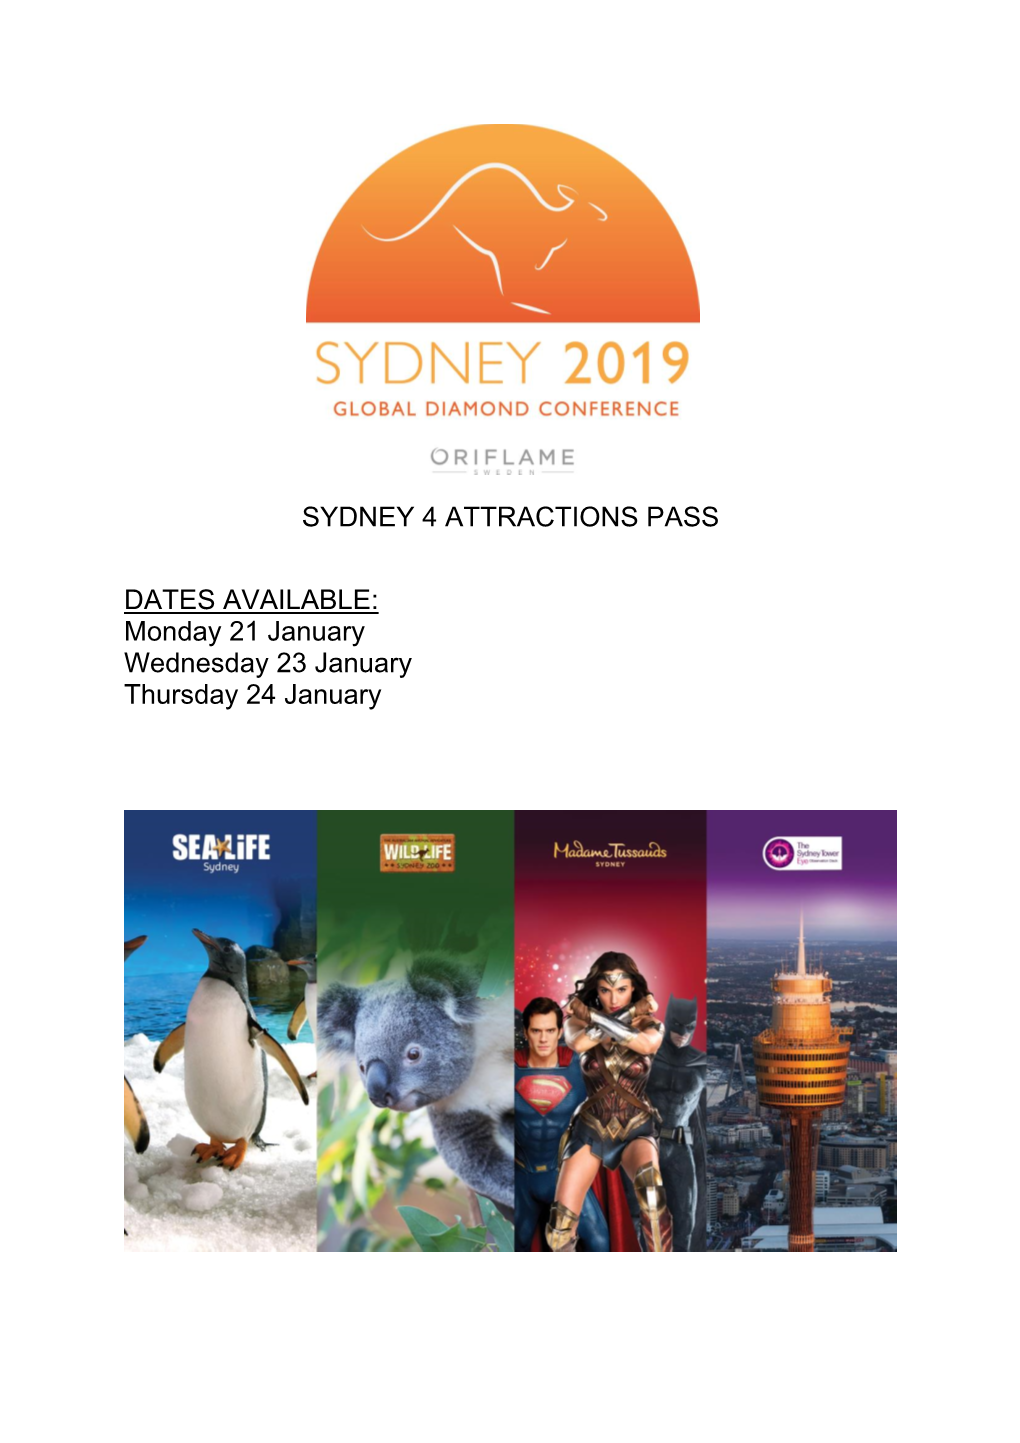 SYDNEY 4 ATTRACTIONS PASS DATES AVAILABLE: Monday 21